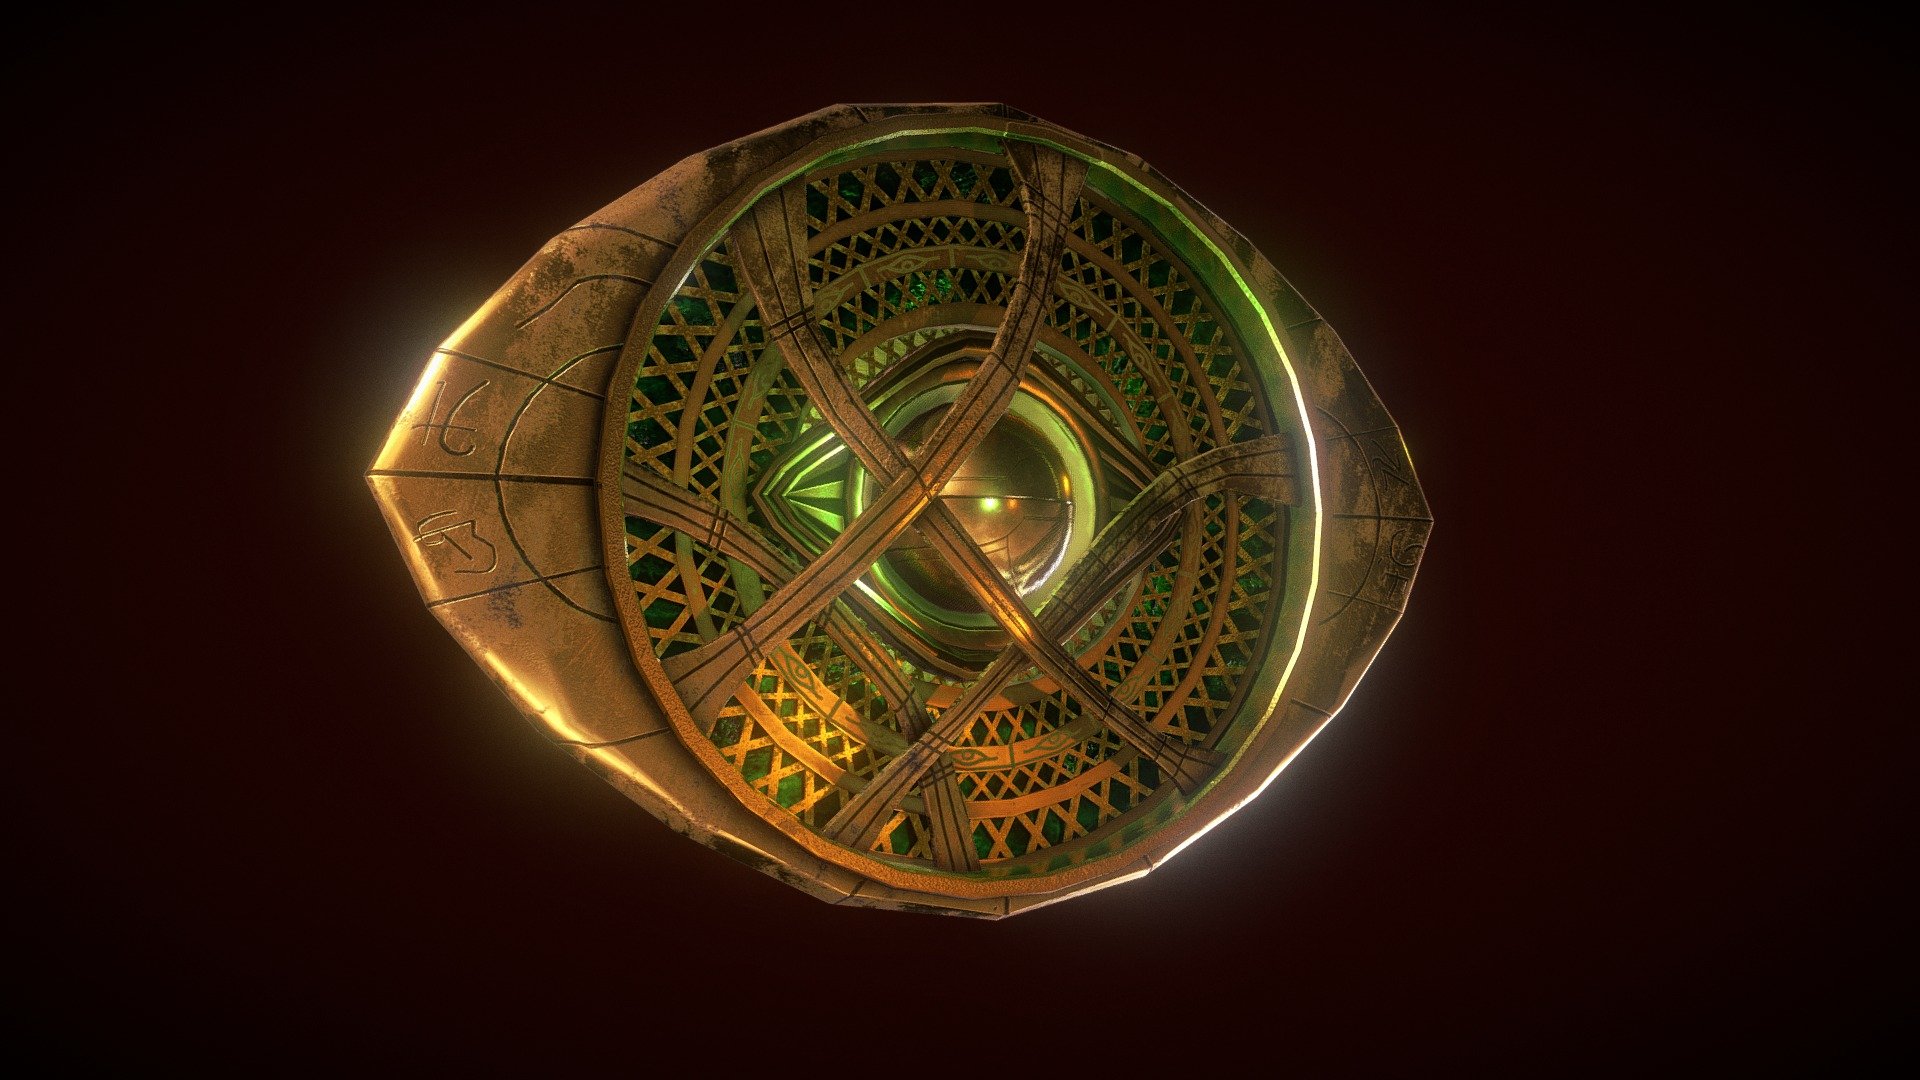 Agamotto, a powerful mystic being and one of Doctor Strange's three Vishanti, is said to have used the Eye during his time as Sorcerer Supreme of the Earth dimension. The Eye's origins are currently unknown, but there are theories of how it came into existence. Some believe that it was discovered by Agamotto among the seas and stars, where it had drifted for ages. Others claim that it was created by Agamotto himself, which makes sense when the Eye's powers are compared to those of &ldquo;the All-Seeing.